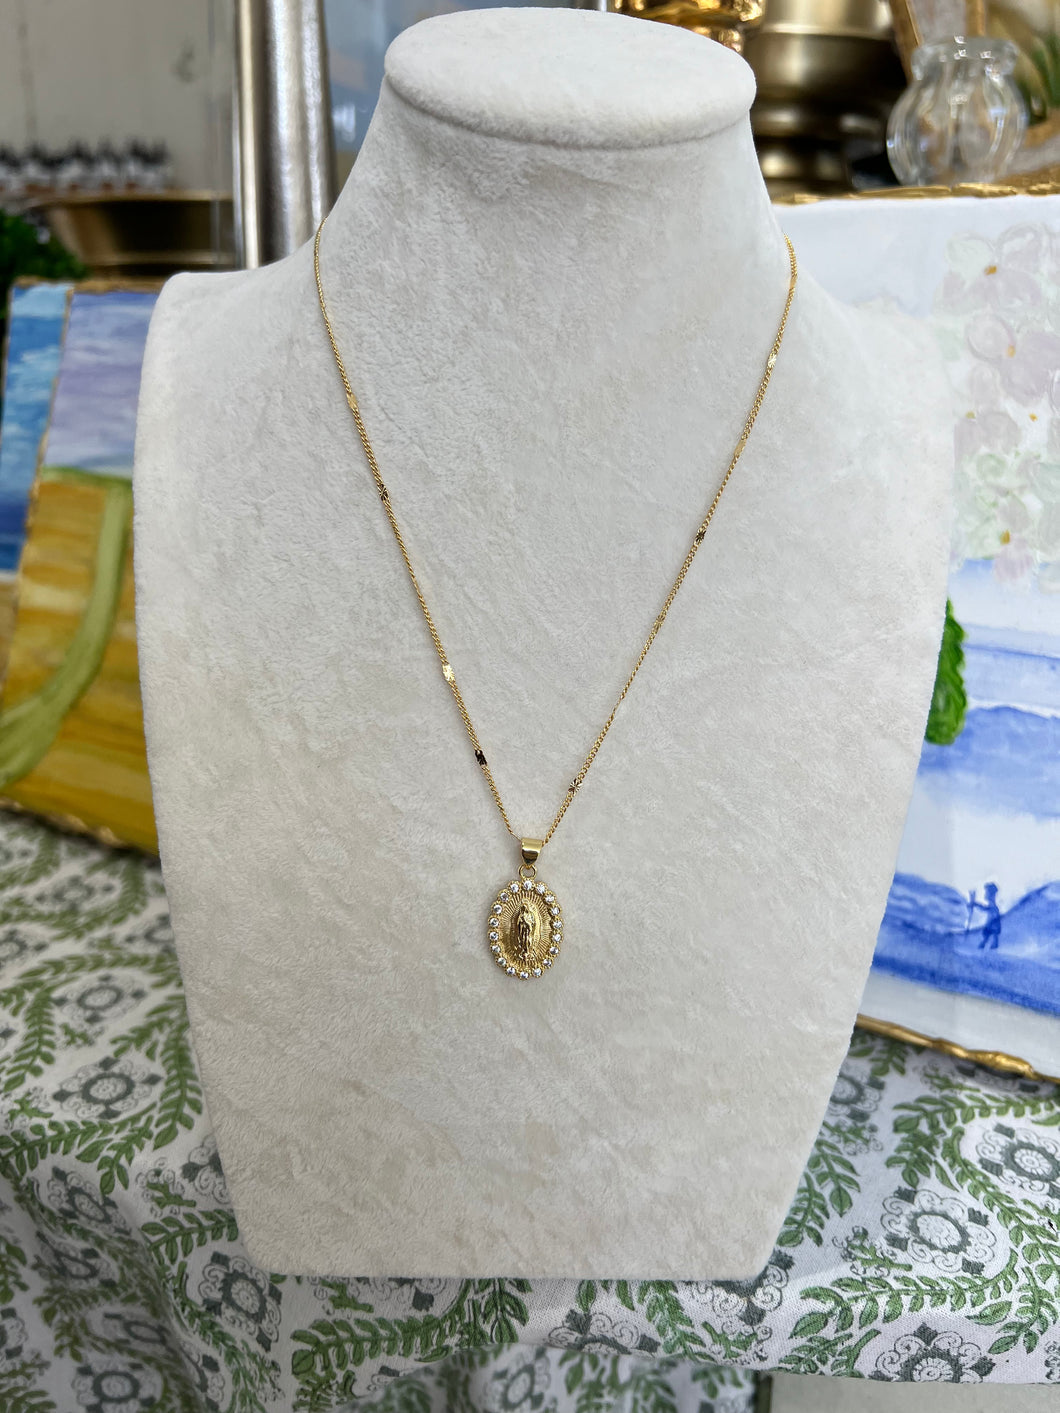 Our lady large necklace  - Sophie Mo’s